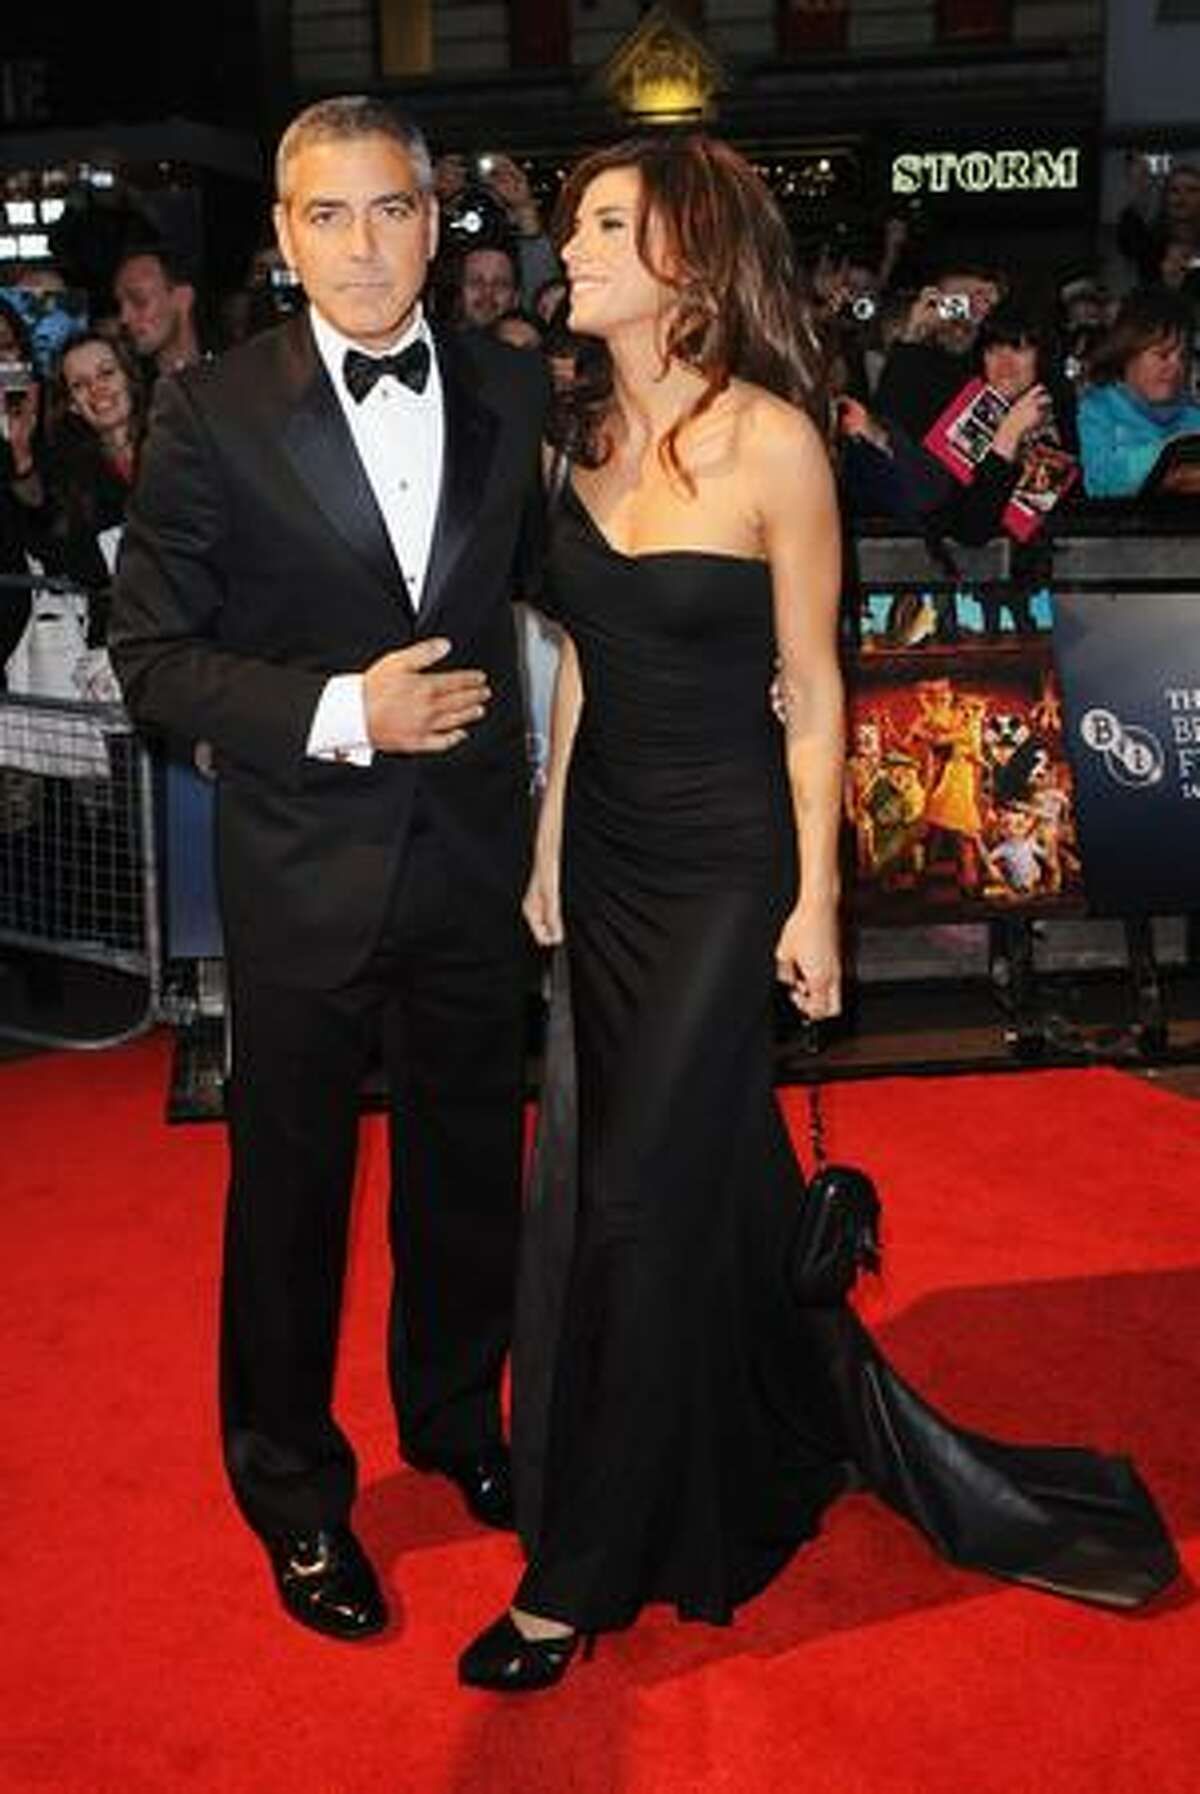 Actor George Clooney and girlfriend Elisabetta Canalis attend the world premiere of 'Fantastic Mr. Fox' and the opening gala of the Times BFI London Film Festival at the Odeon Leicester Square in London, England.